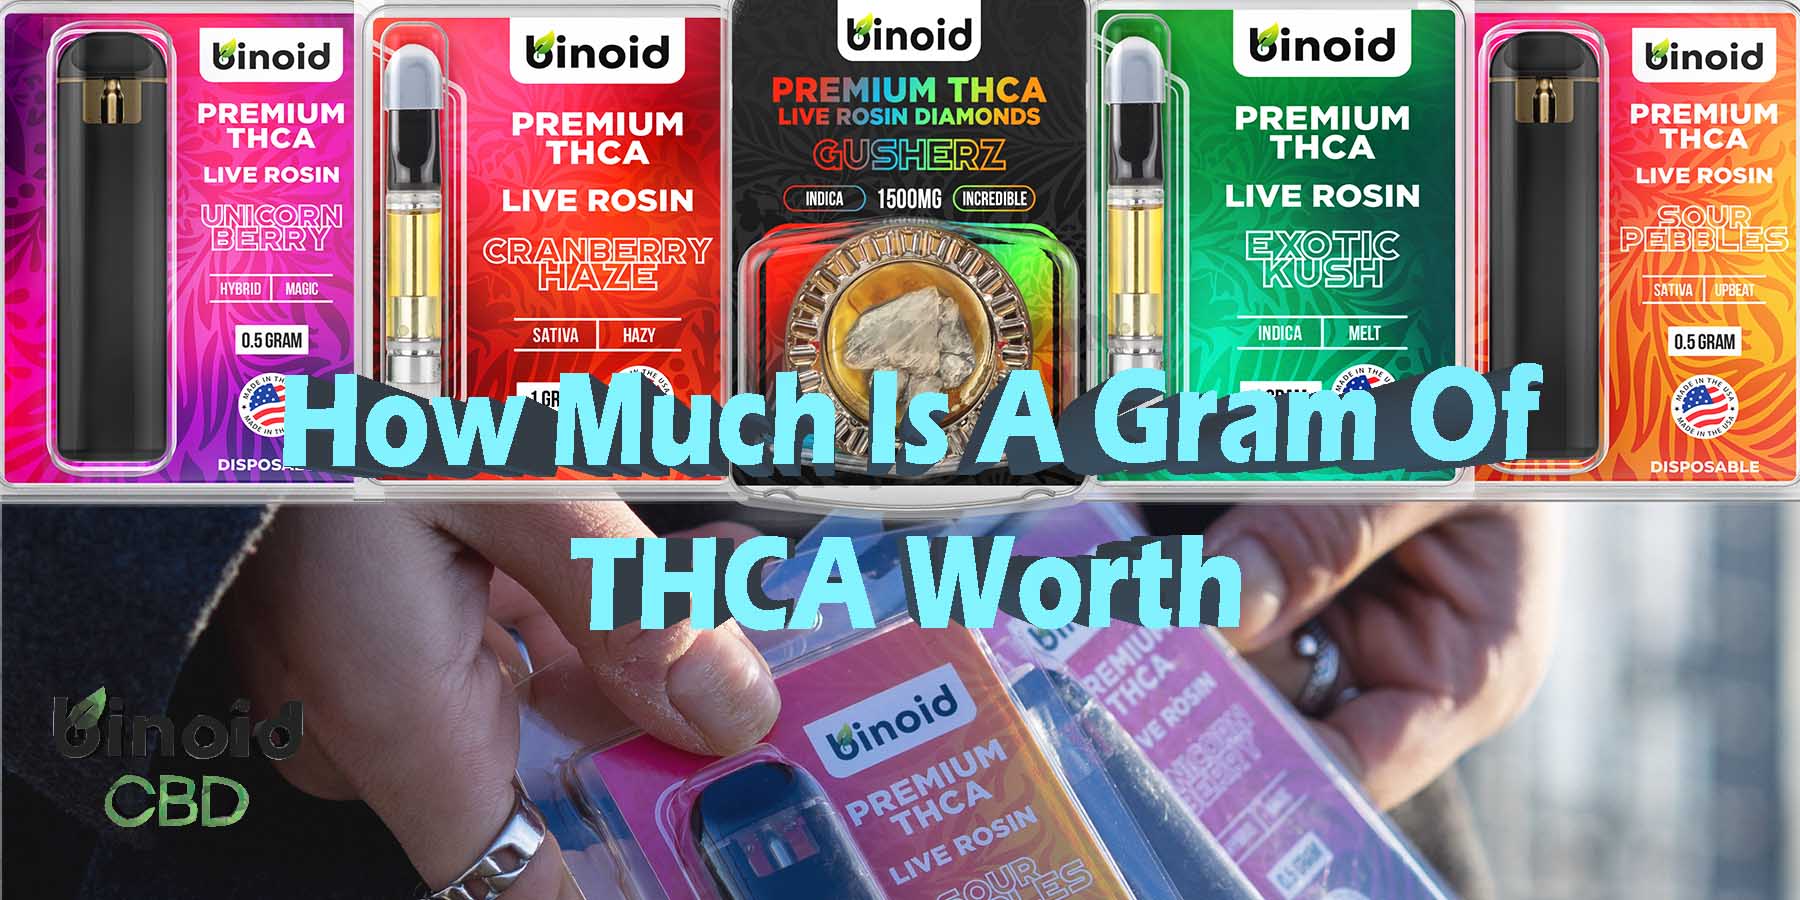 How Much Is A Gram Of THCA Get Near ME Strongest Best Brand Binoid